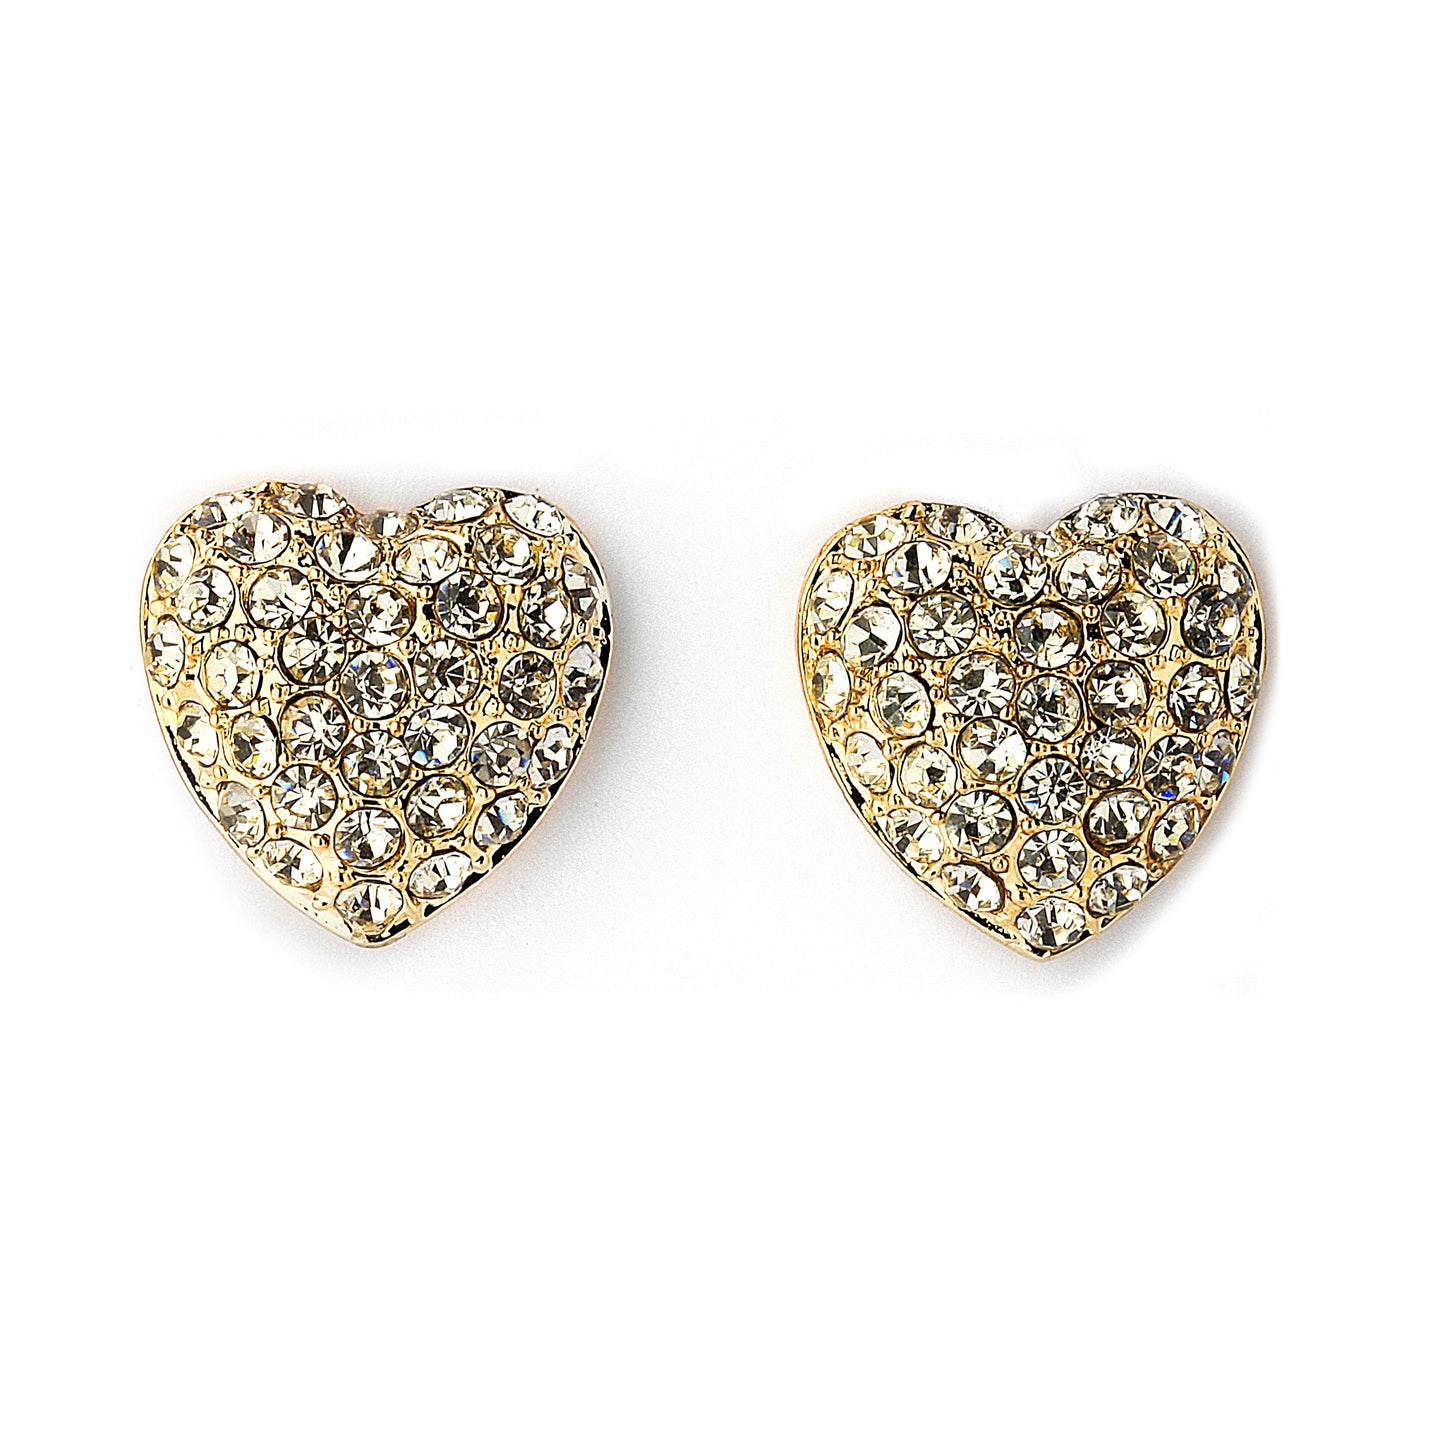 Pave CZ Heart Earrings - 14K Gold Filled